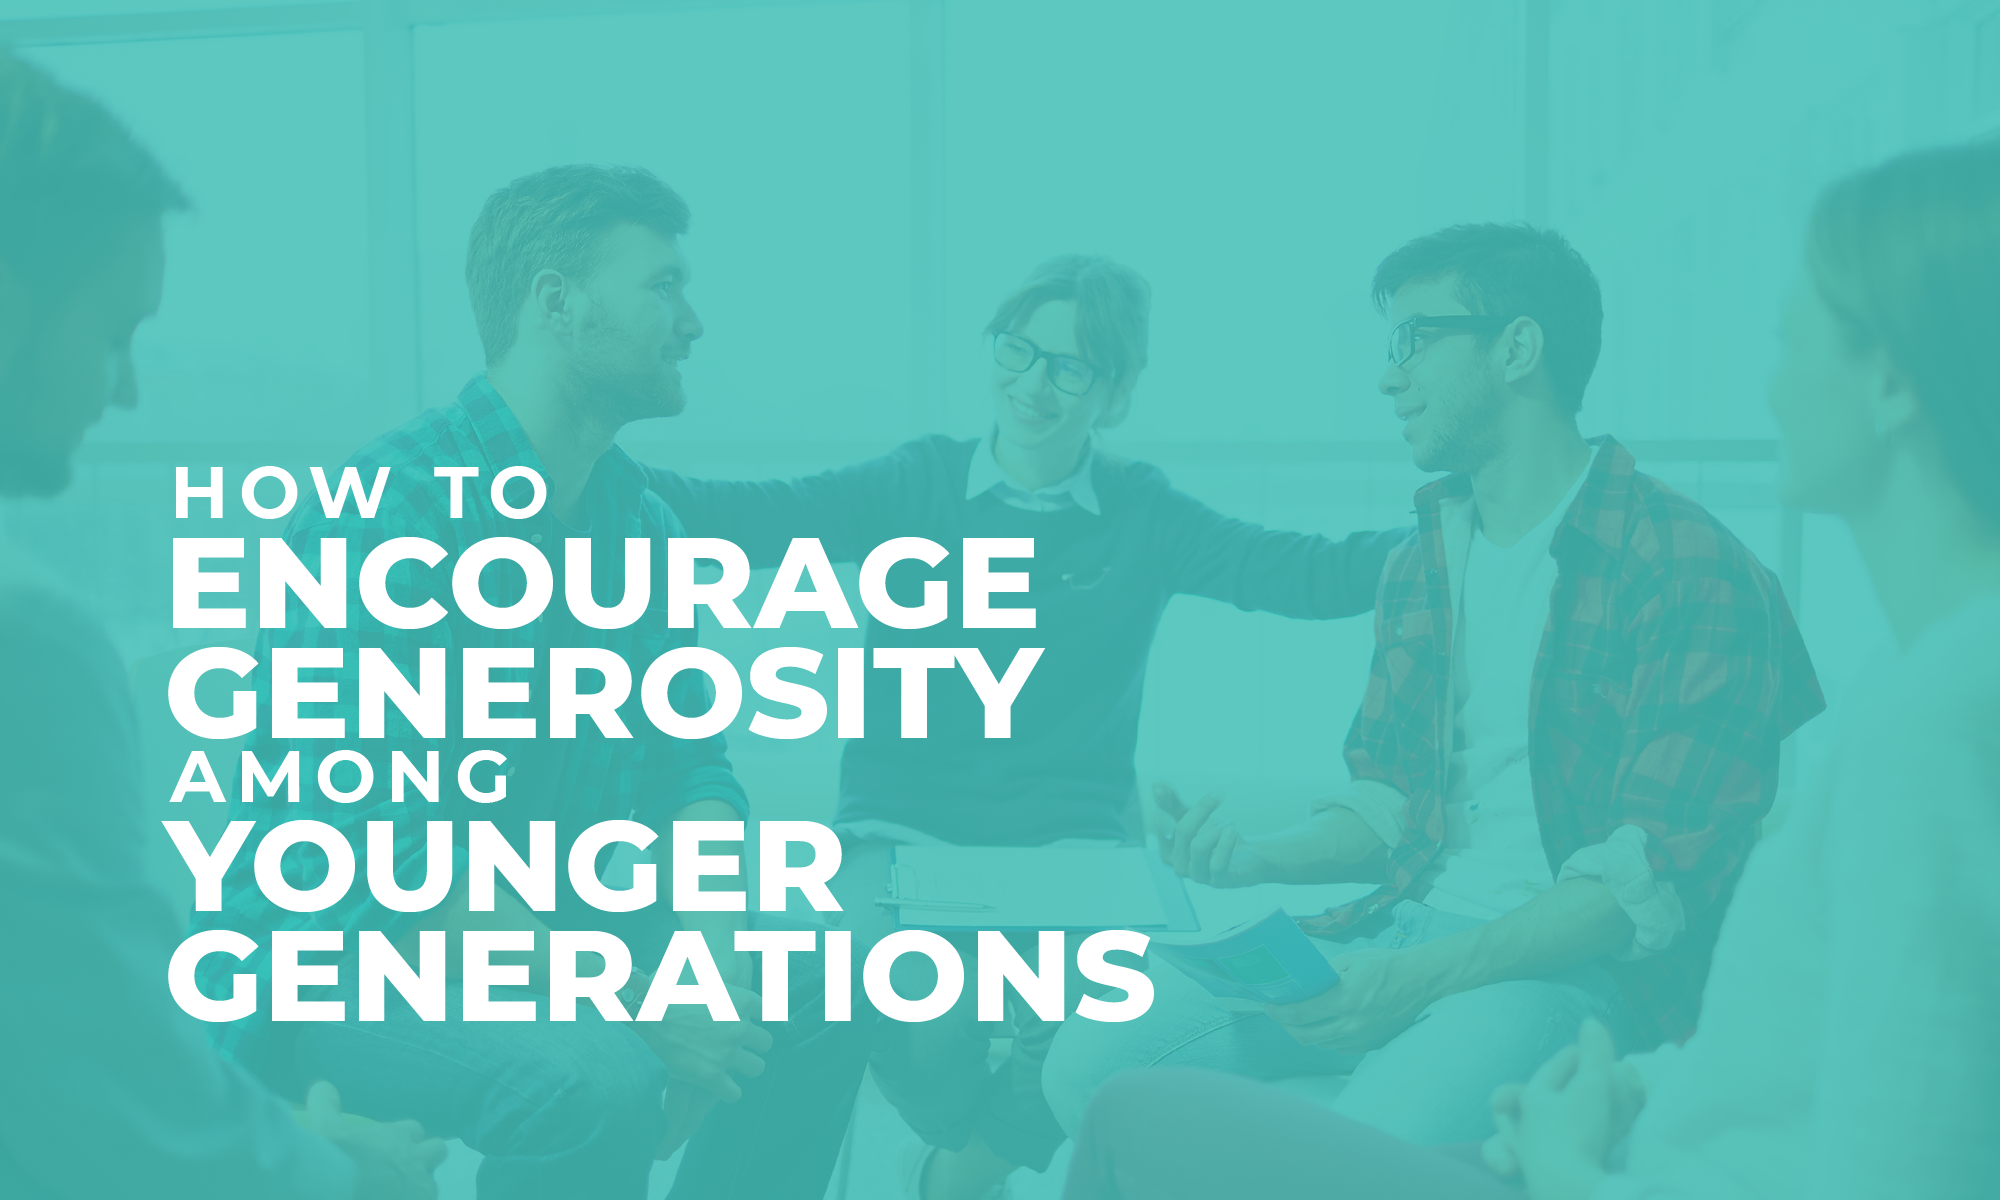 This guide will cover why you should encourage generosity among younger generations and three ways to do that.